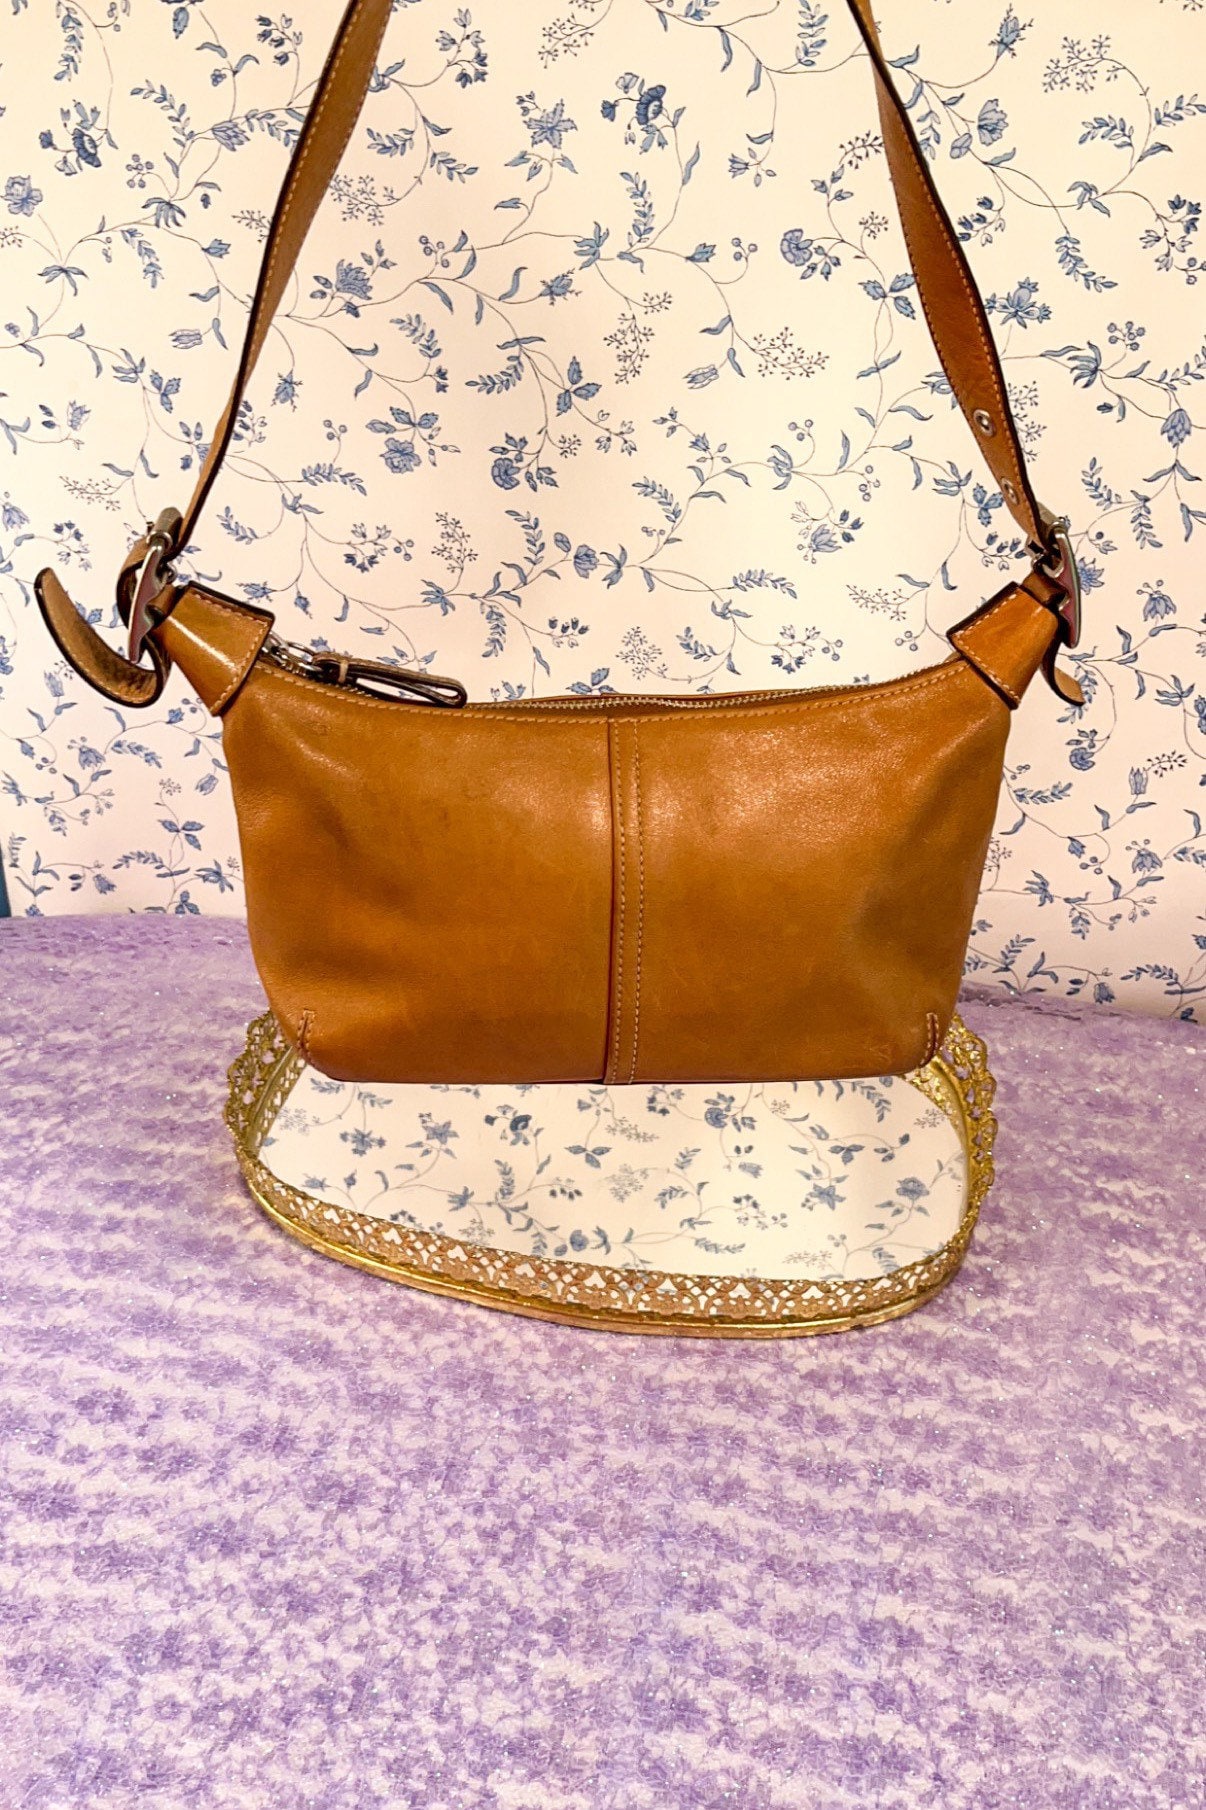 Vintage Coach Brown Leather Hobo Bag Purse 9342 by qtvintages